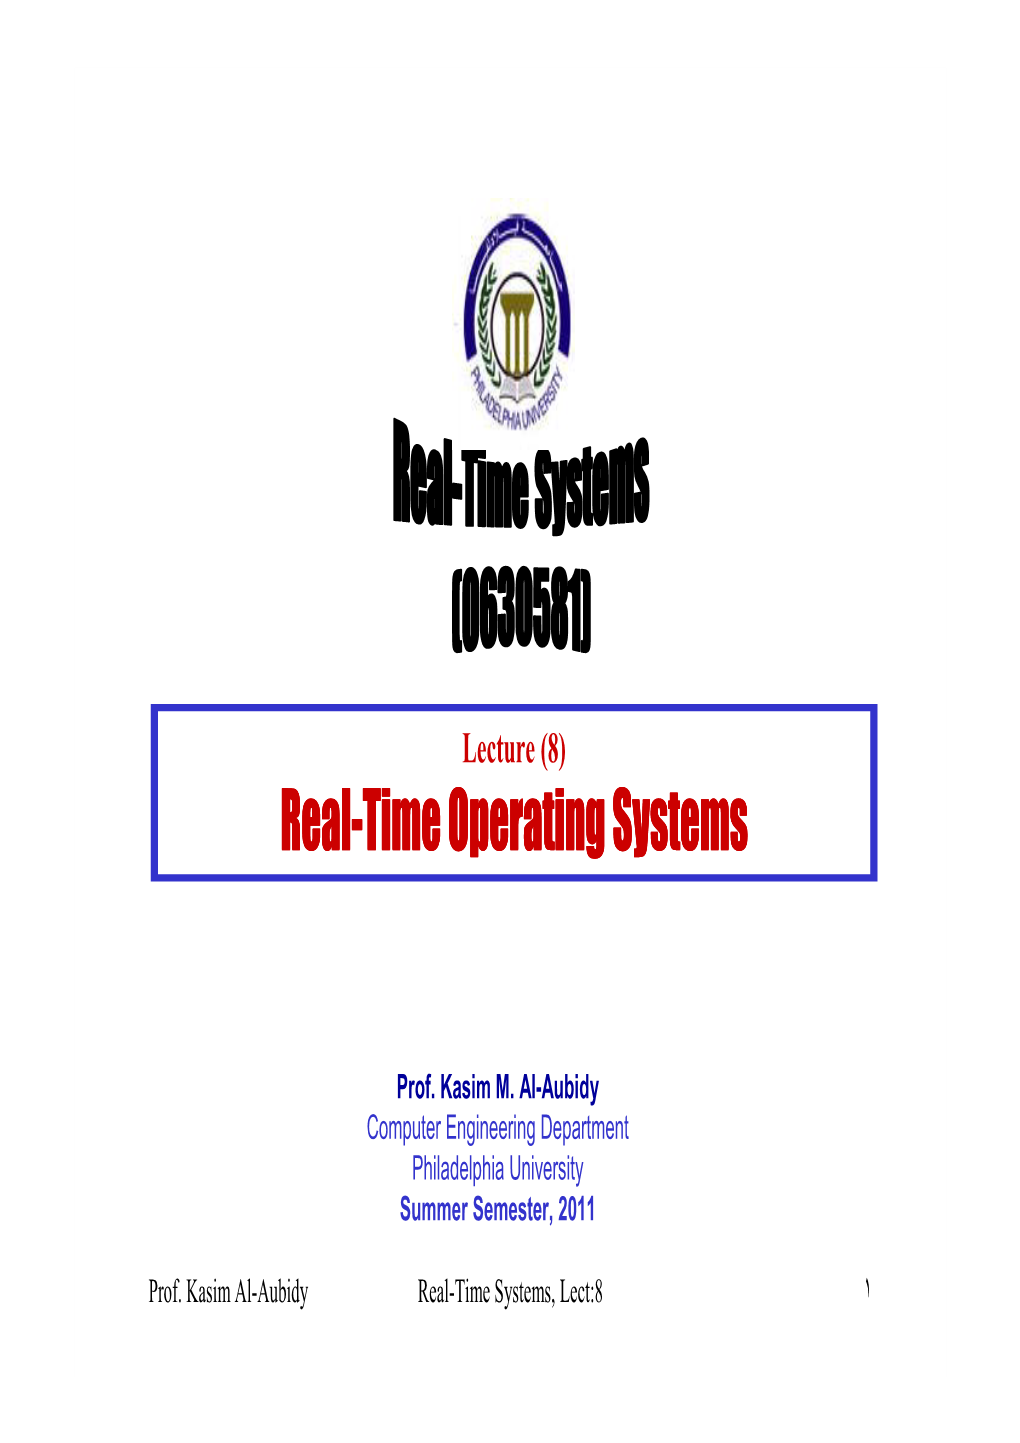 Real-Time Operating System (RTOS)